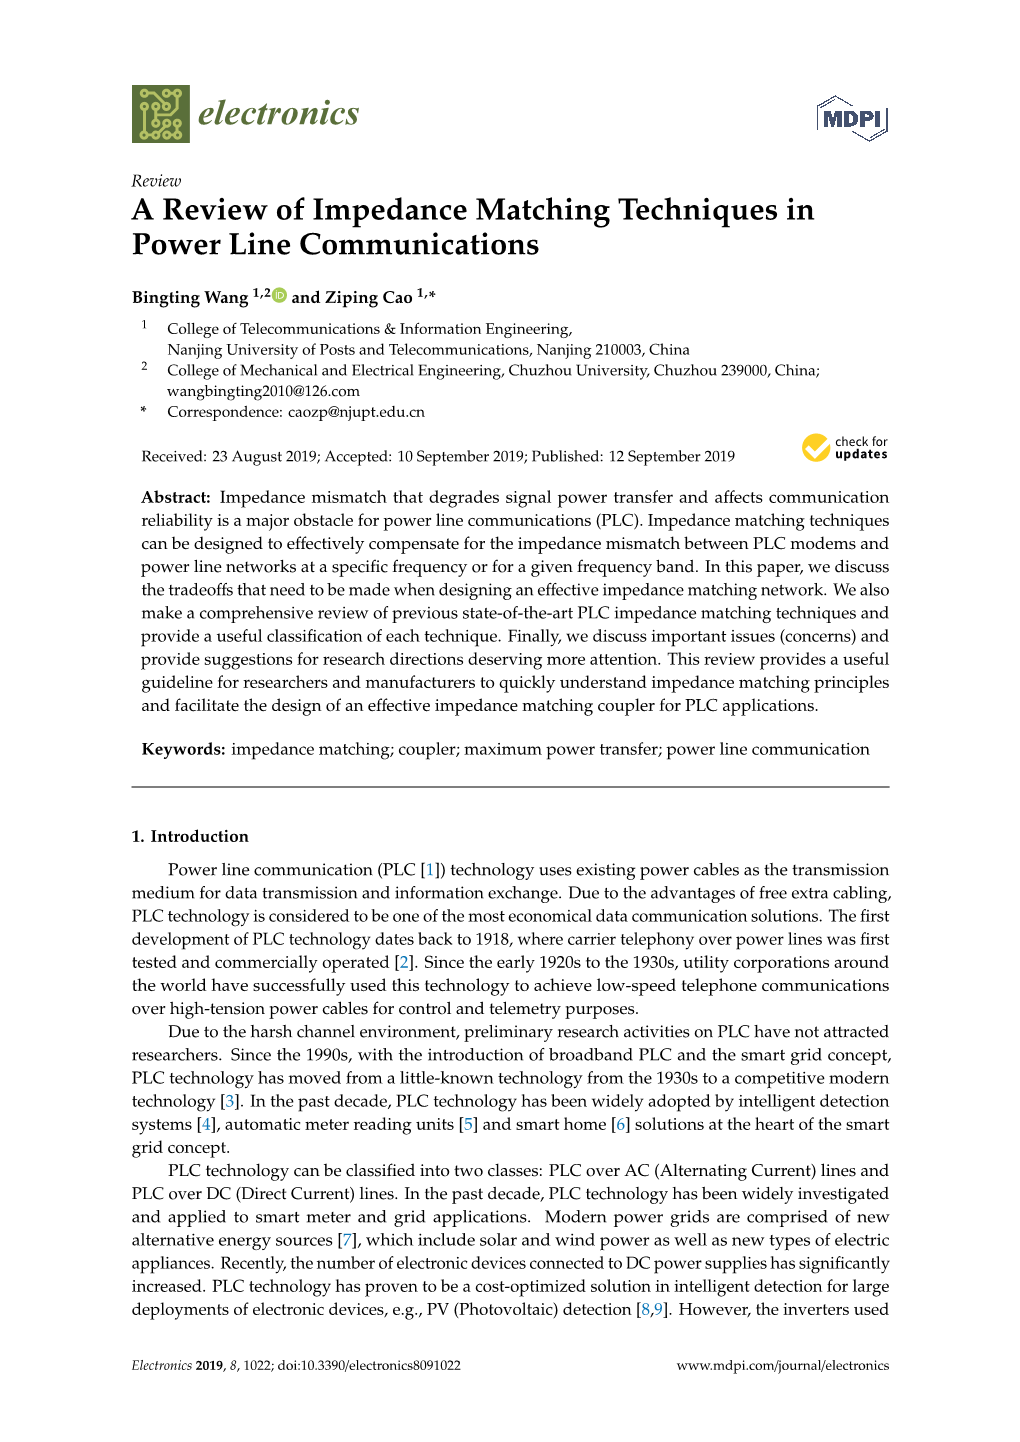 A Review of Impedance Matching Techniques in Power Line Communications